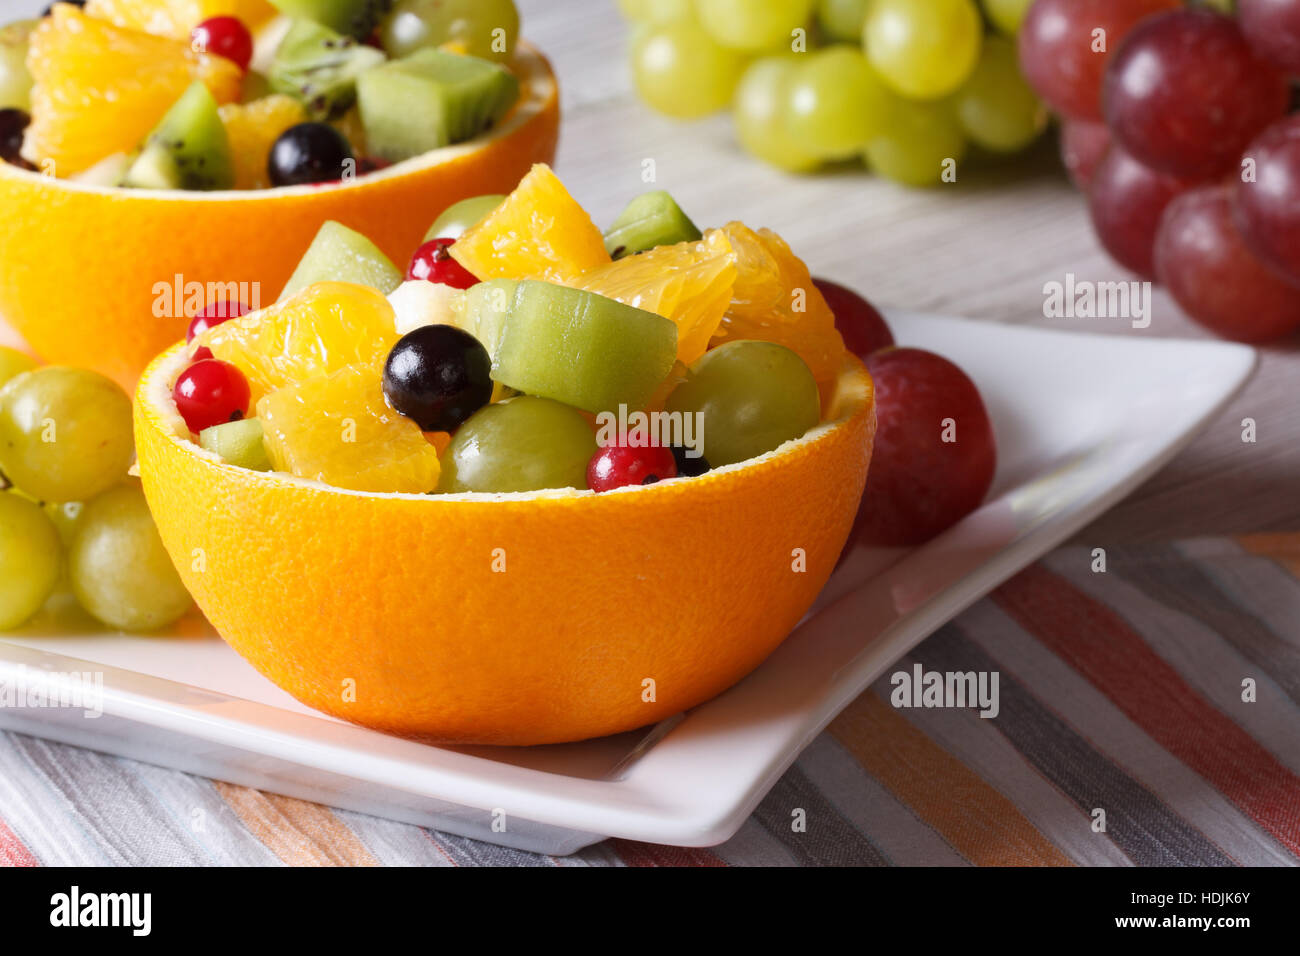 Fruit salad with grapes, currants, pears, kiwi in hollowed-out oranges closeup horizontal Stock Photo